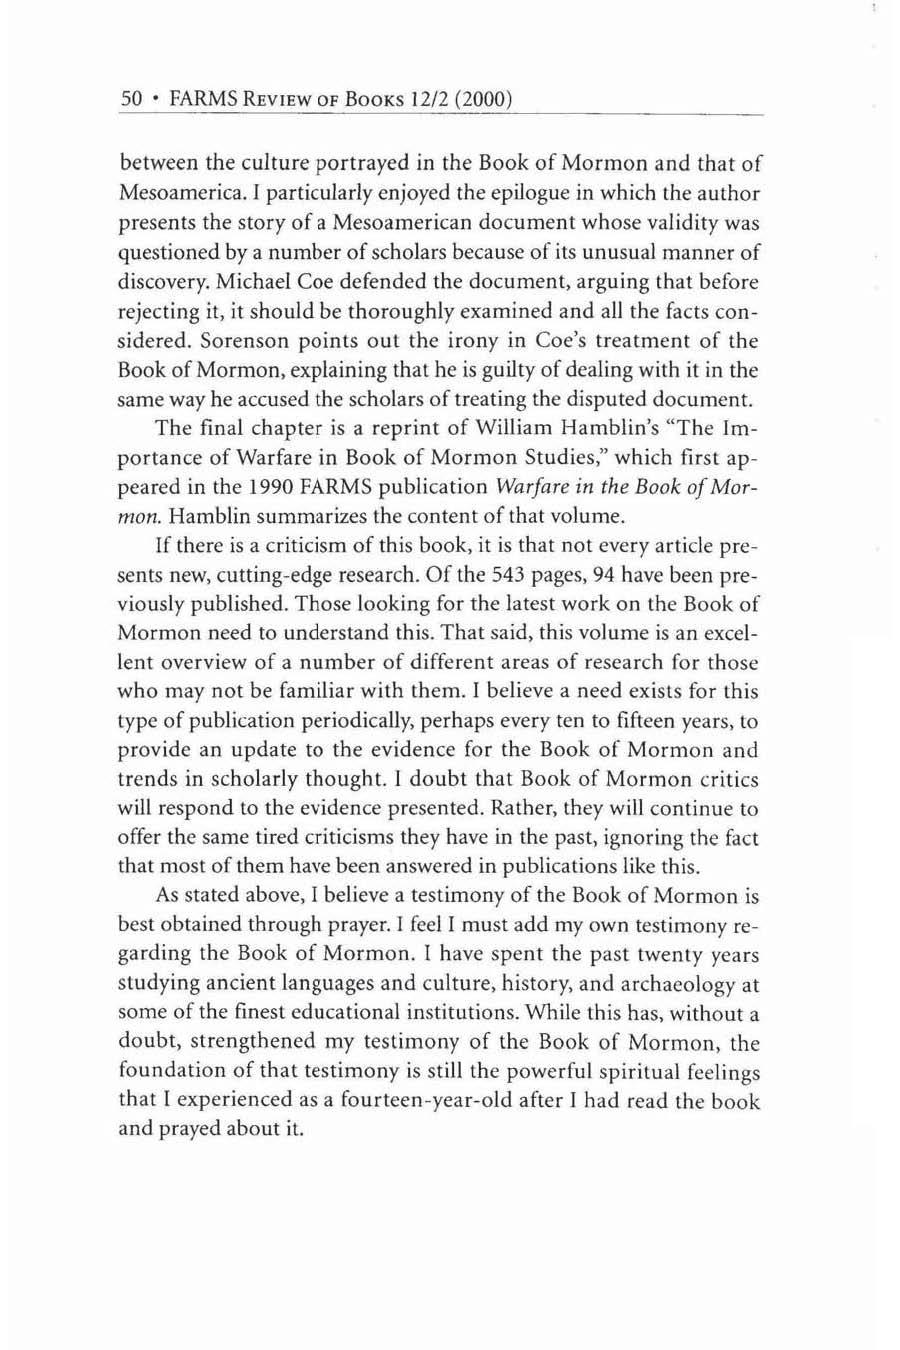 50 FARMS REVIEW Of BOOKS J 212 (2000 ) between the culture port rayed in the Book of Mormon and that of Mesoamerica.